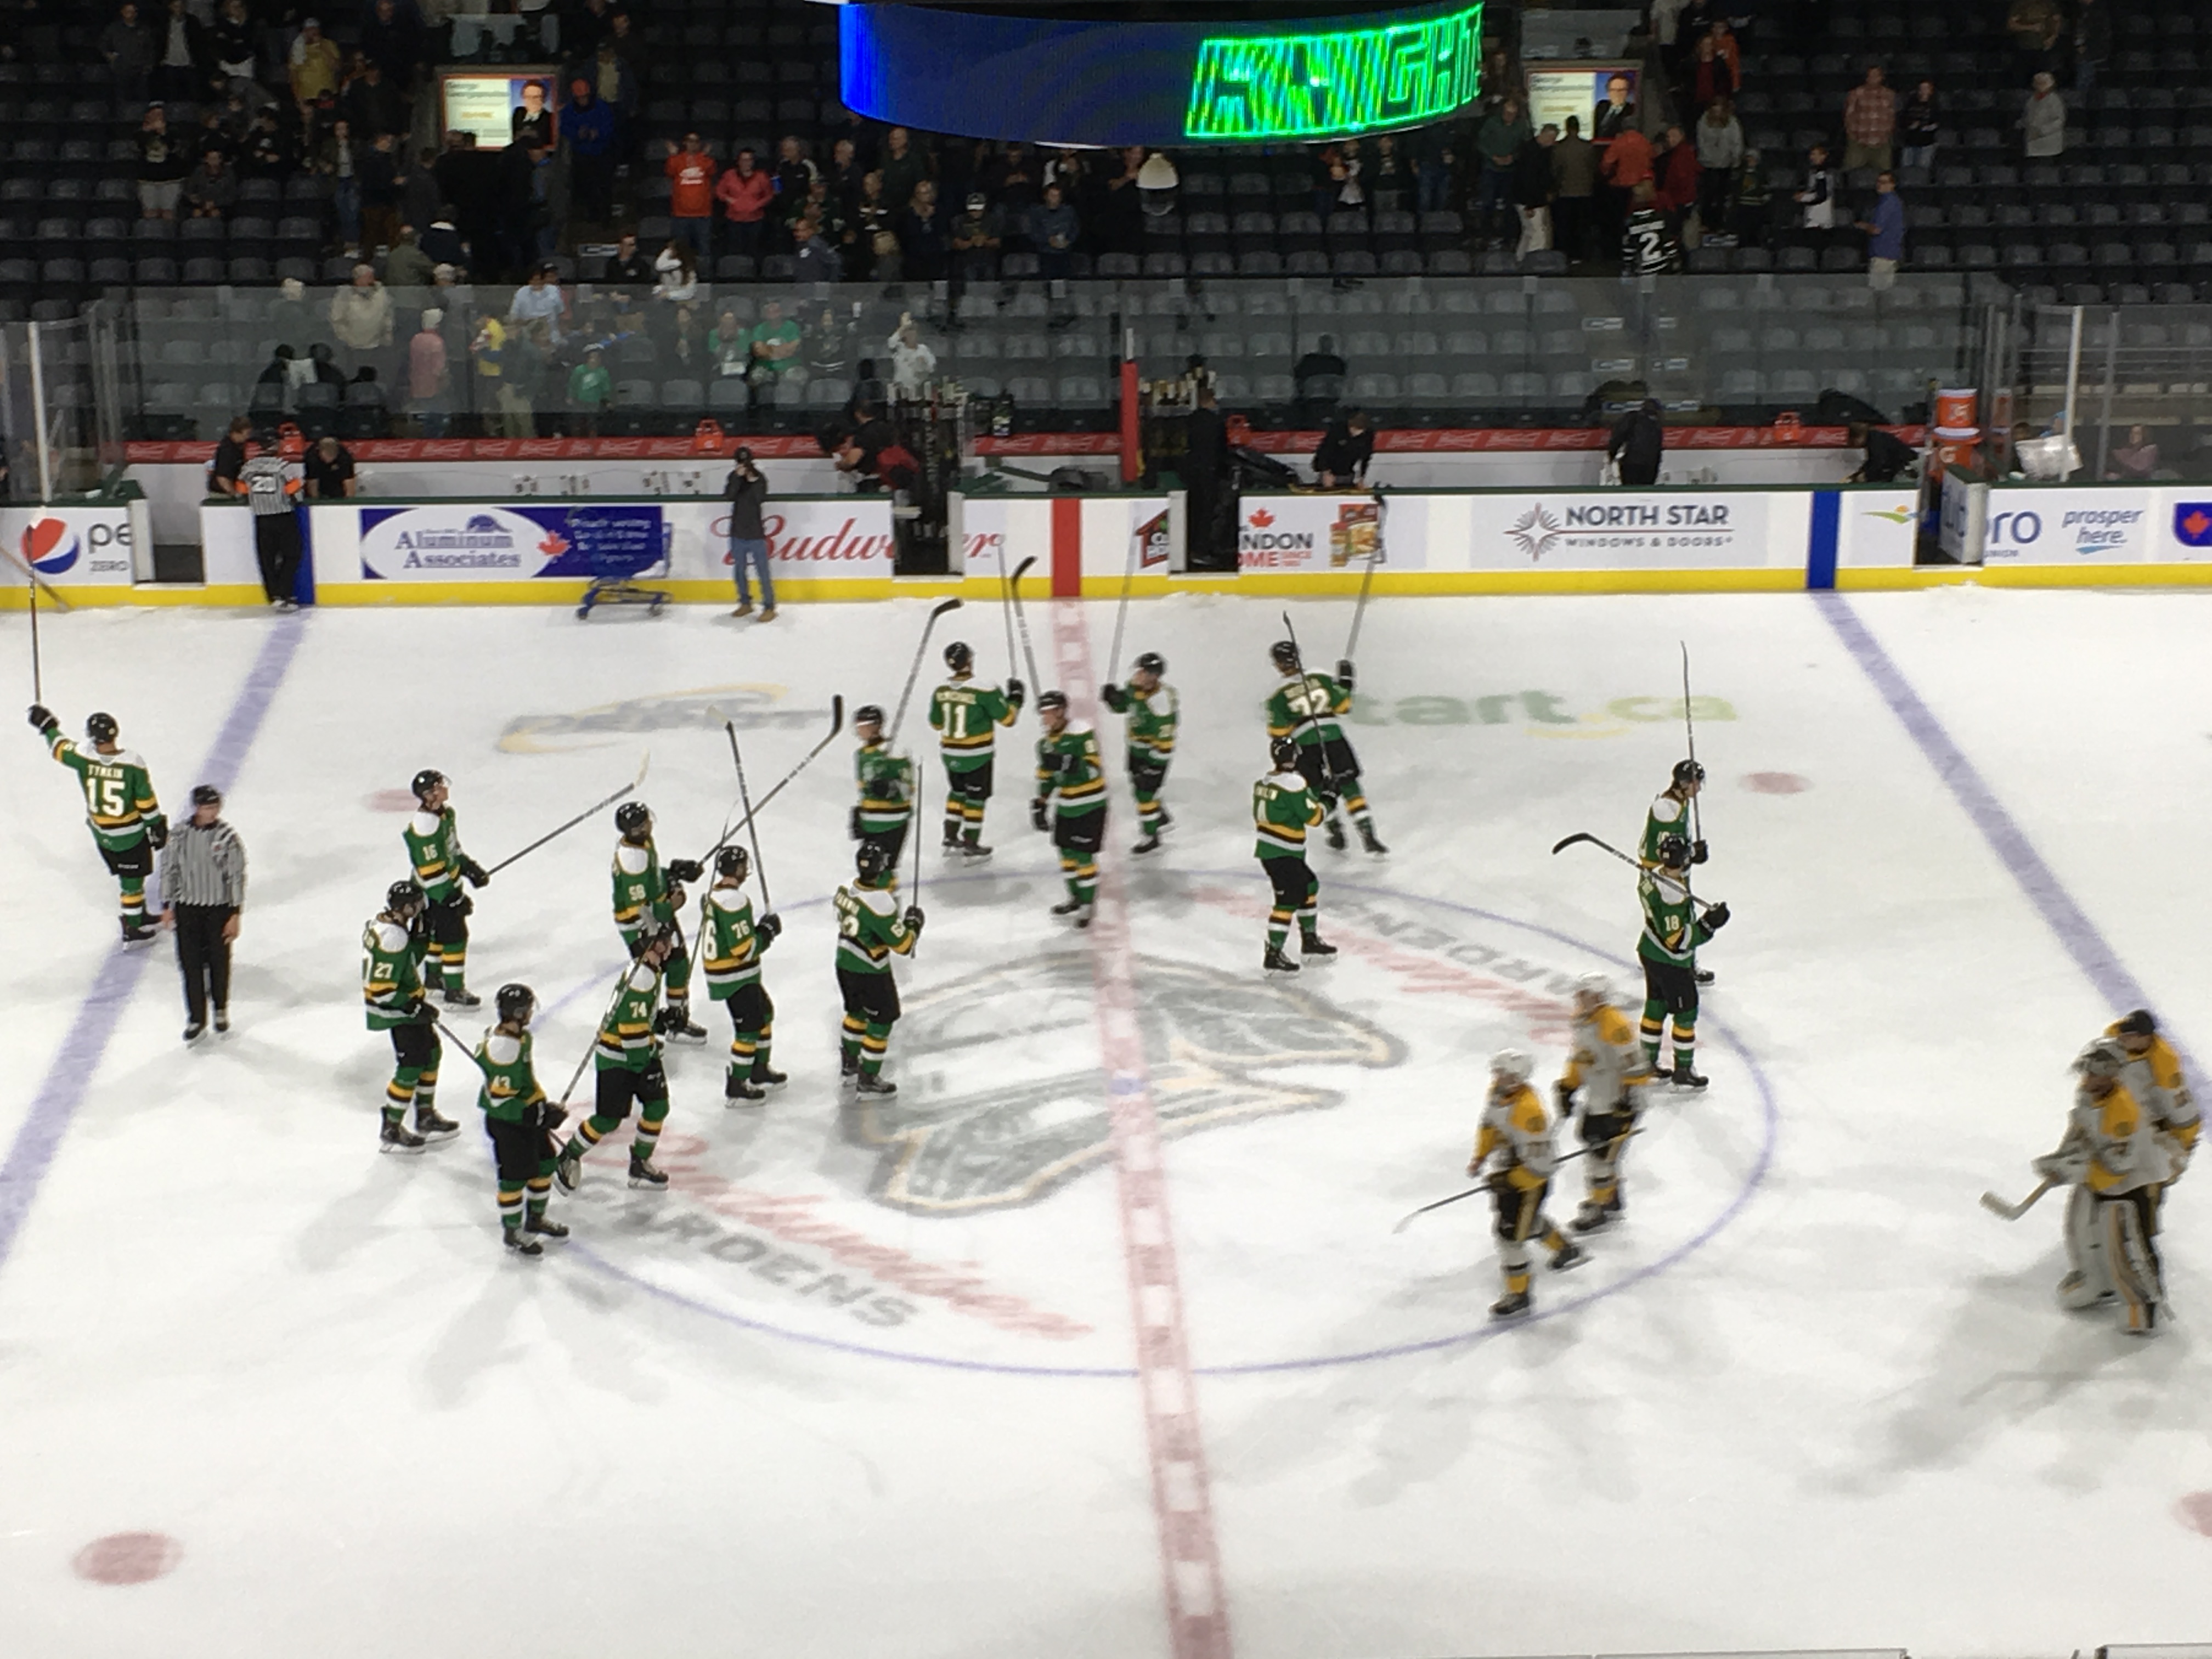 Knights open pre-season with victory over Sarnia - London